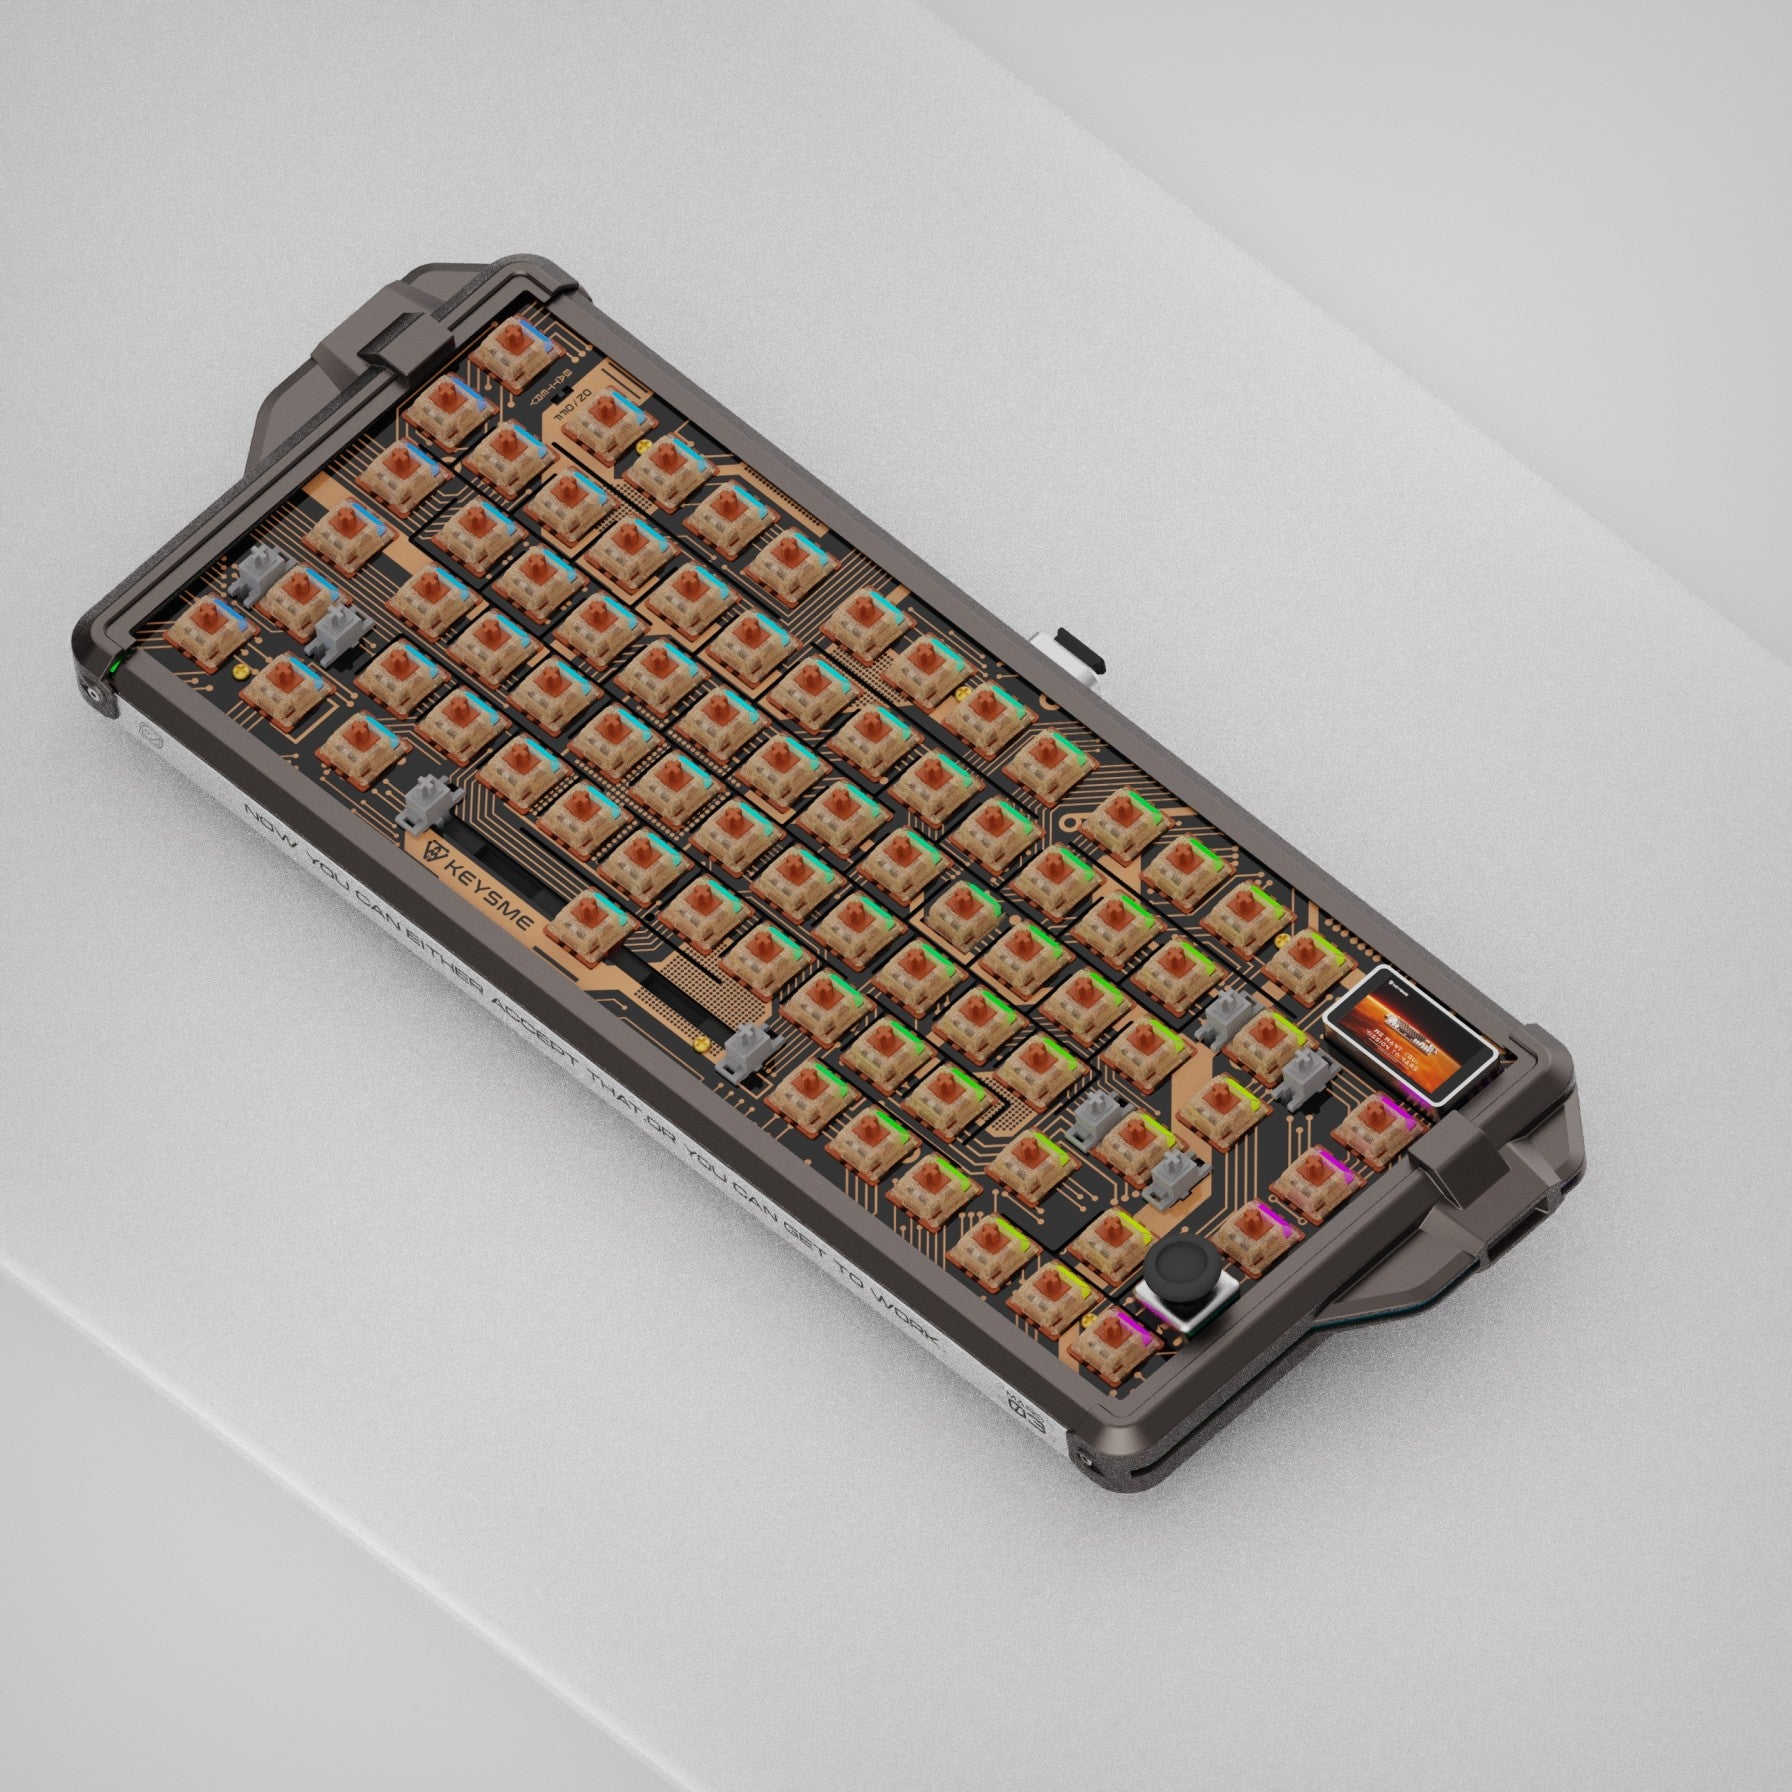 KeysMe Mars 03 spaceship mechanical keyboard hot-swappable Gateron Mars switch for Windows Mac Black Knight color